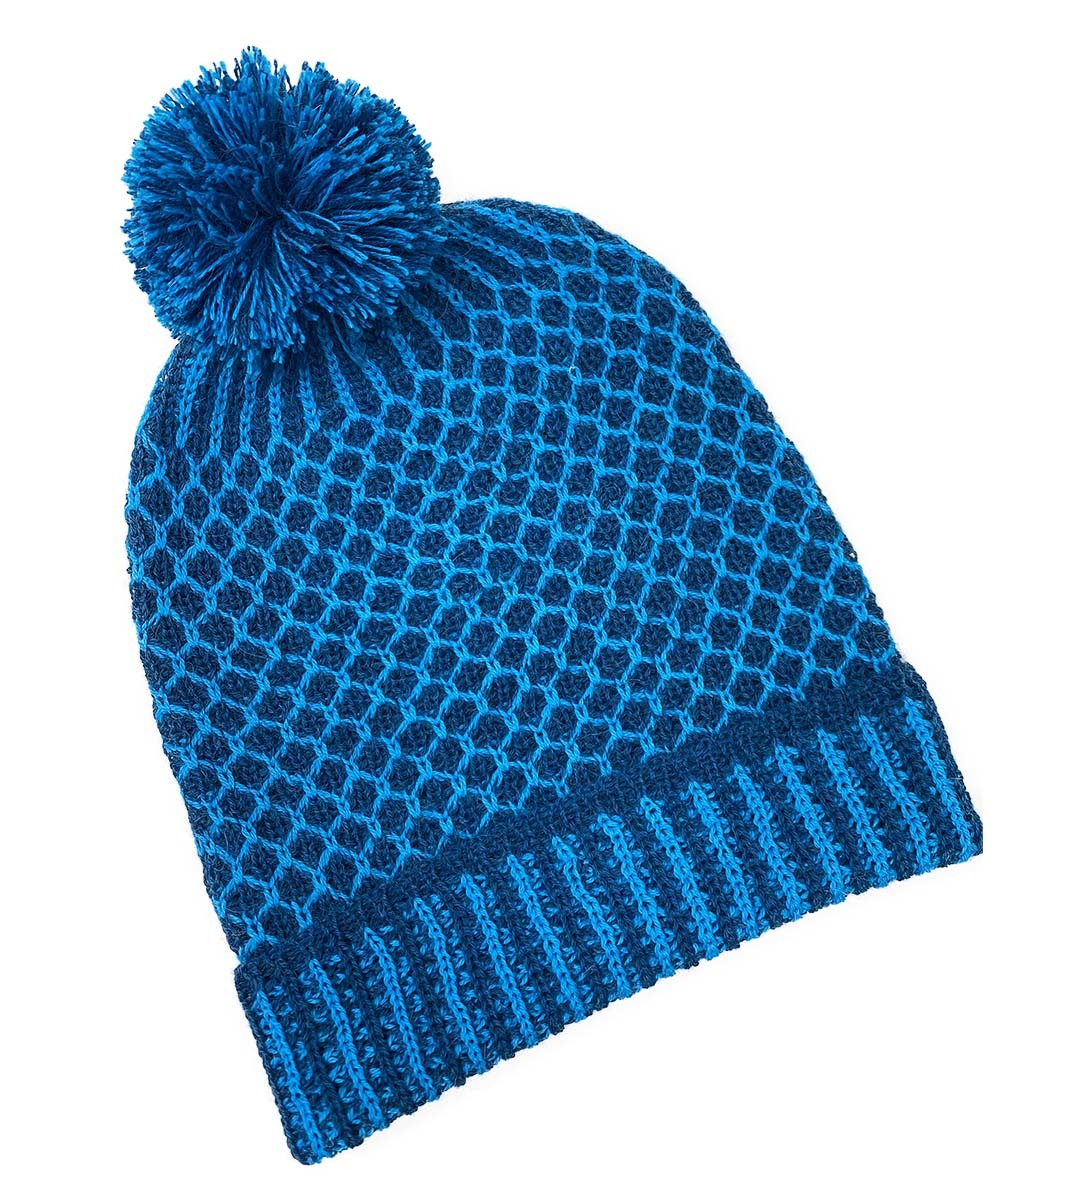 Nogal PomPom Beanie Teal/Turquoise - 1